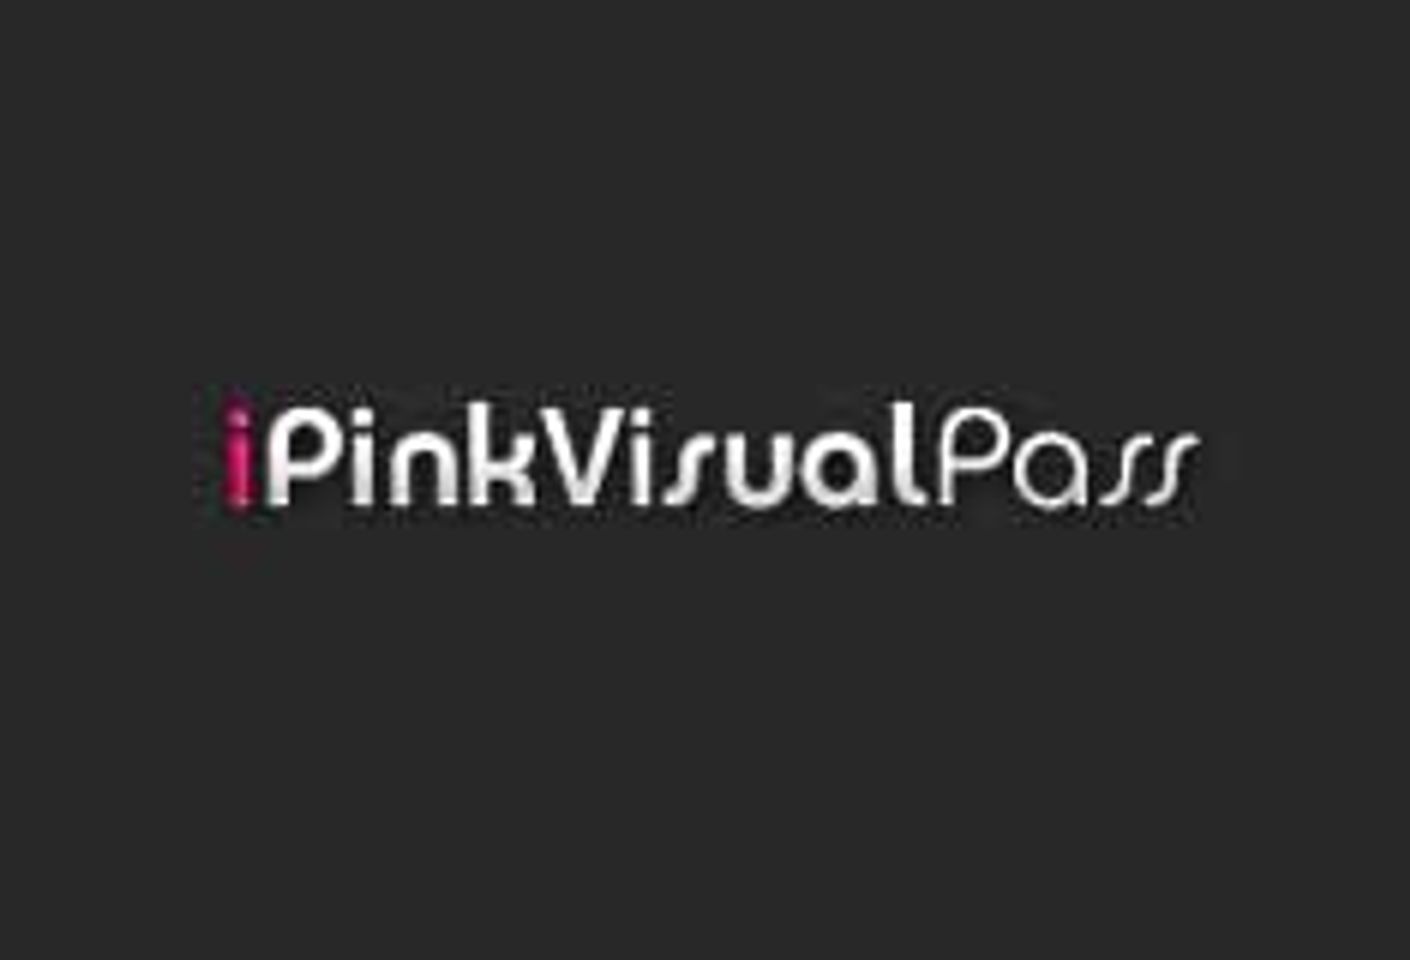 Dating Factory, Pink Visual Partner to Launch Mobile Dating Site